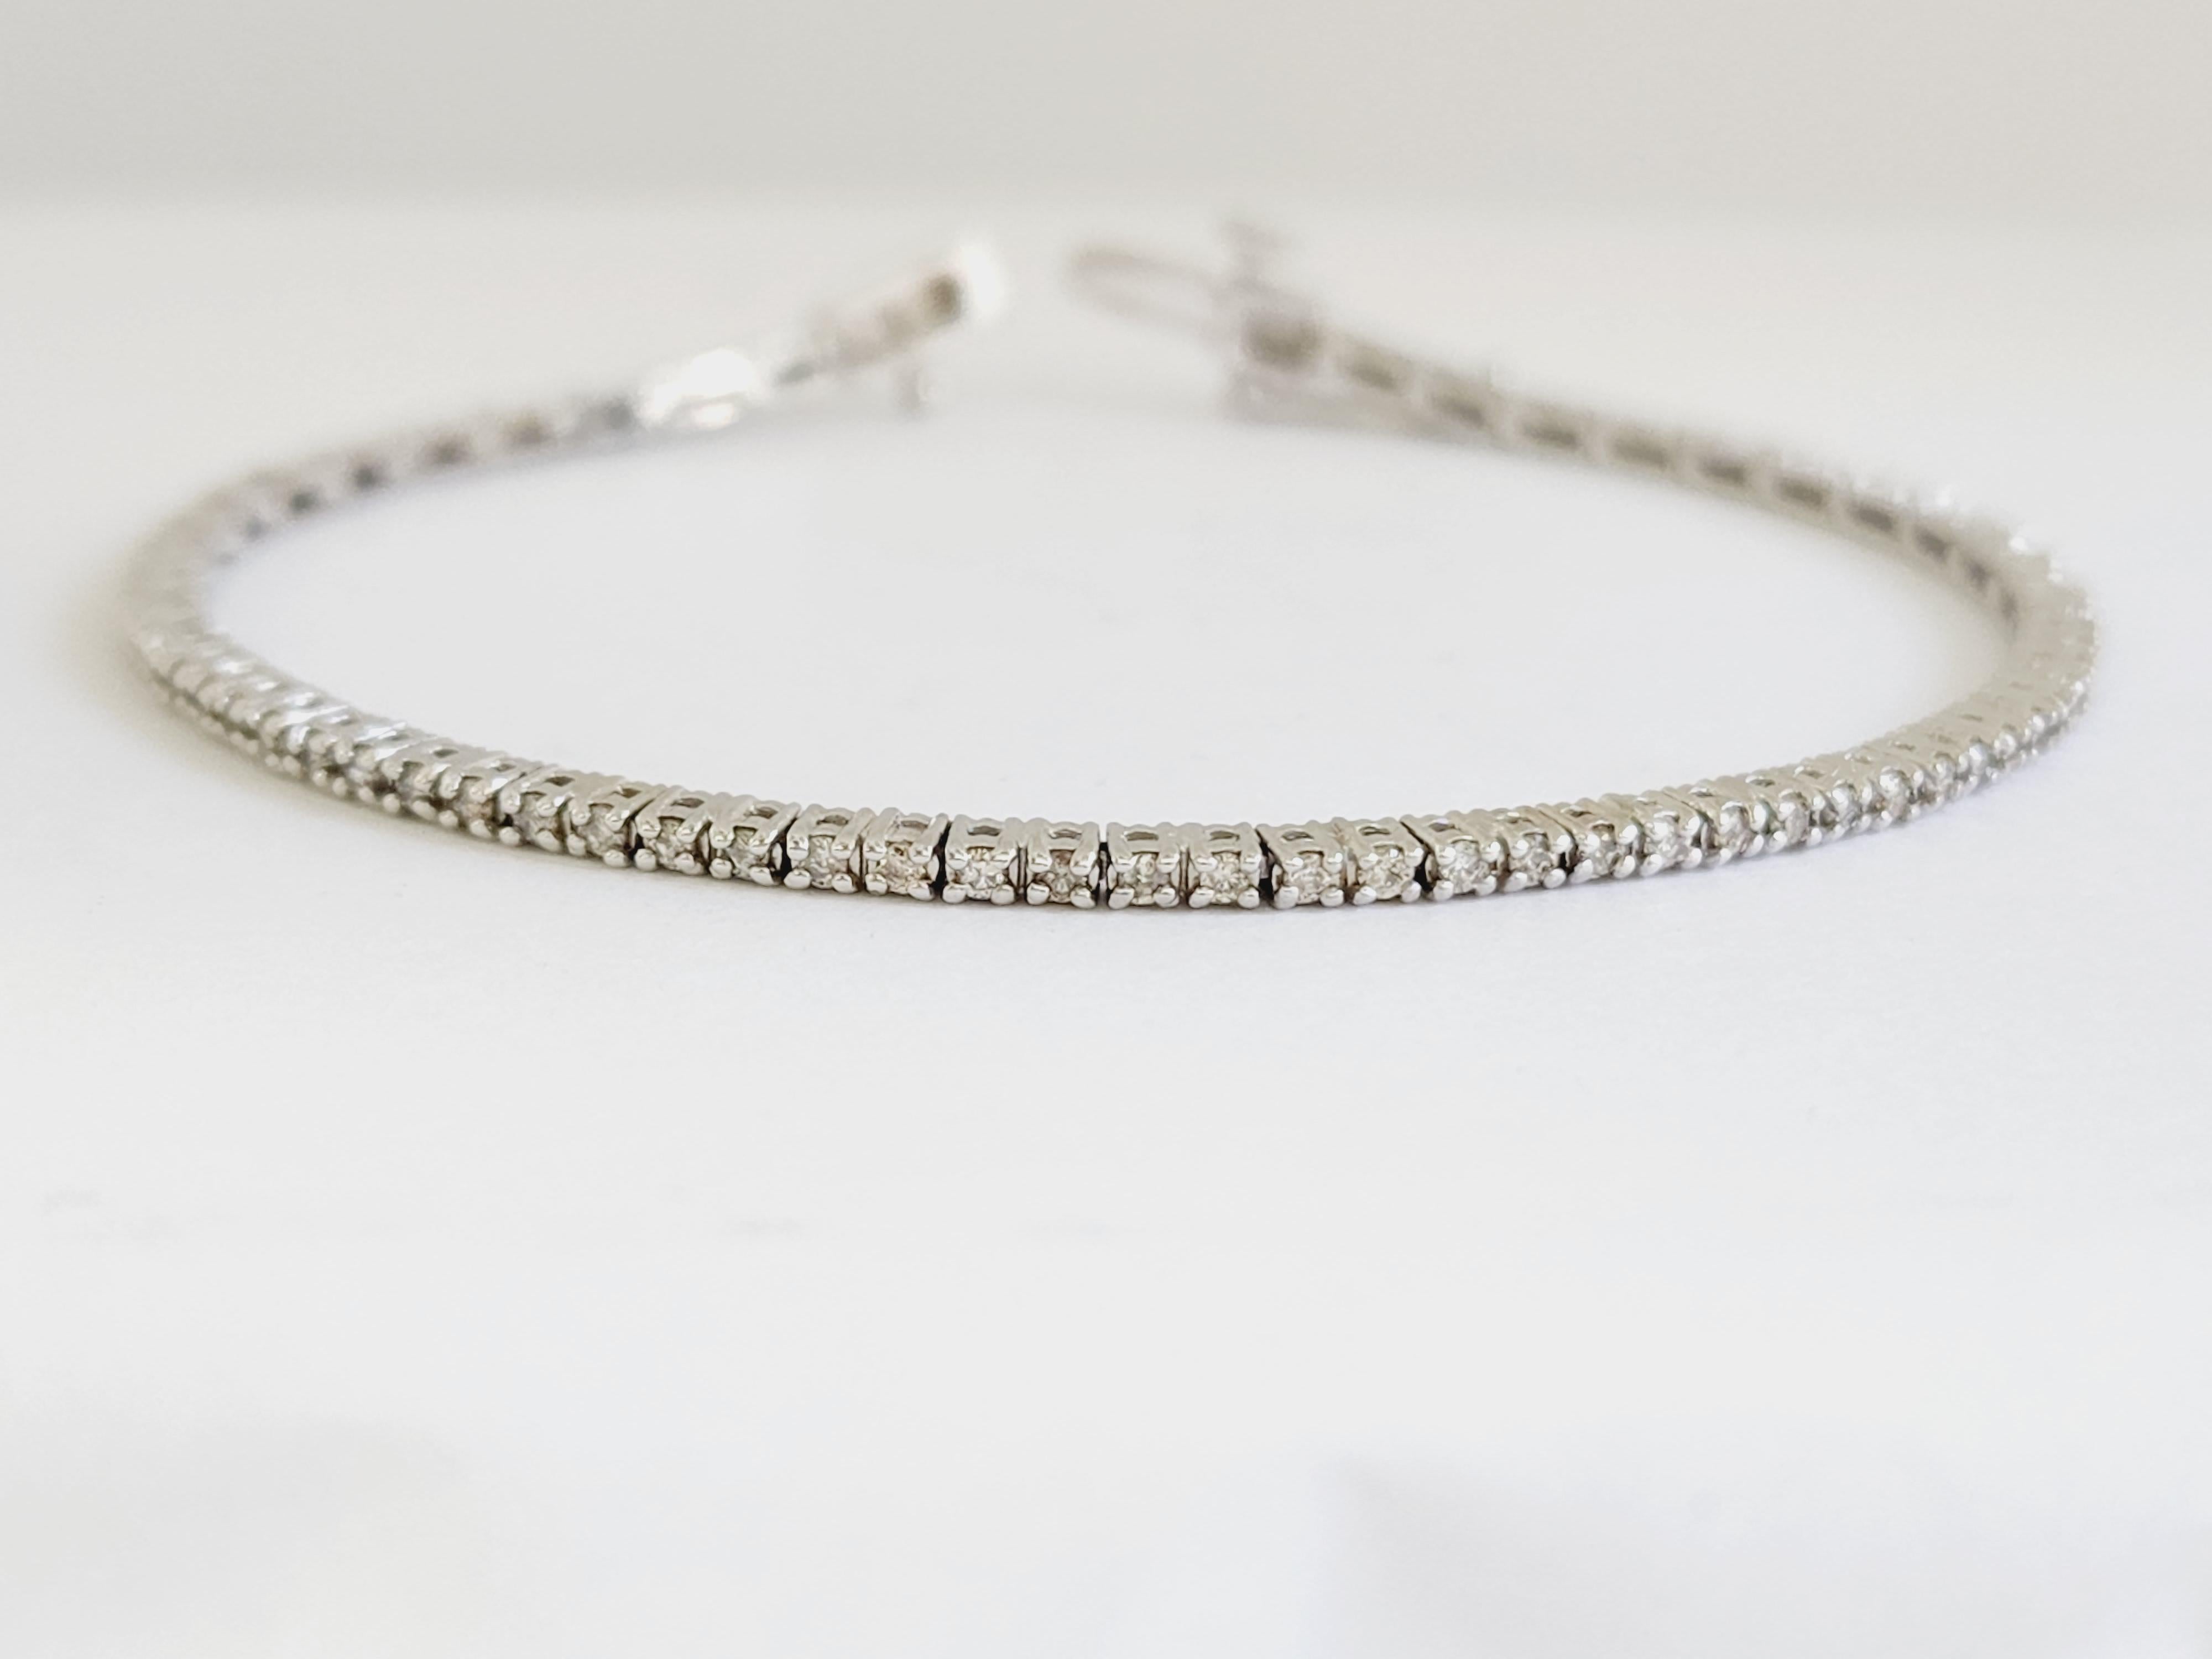 Very sparkling and shiny. a great quality tennis bracelet. 14k white gold. each stone is set in a classic four-prong style for maximum light brilliance. 
7 inch length. Average Color I, Clarity SI, Beautiful for everyday wear.

*Free shipping within